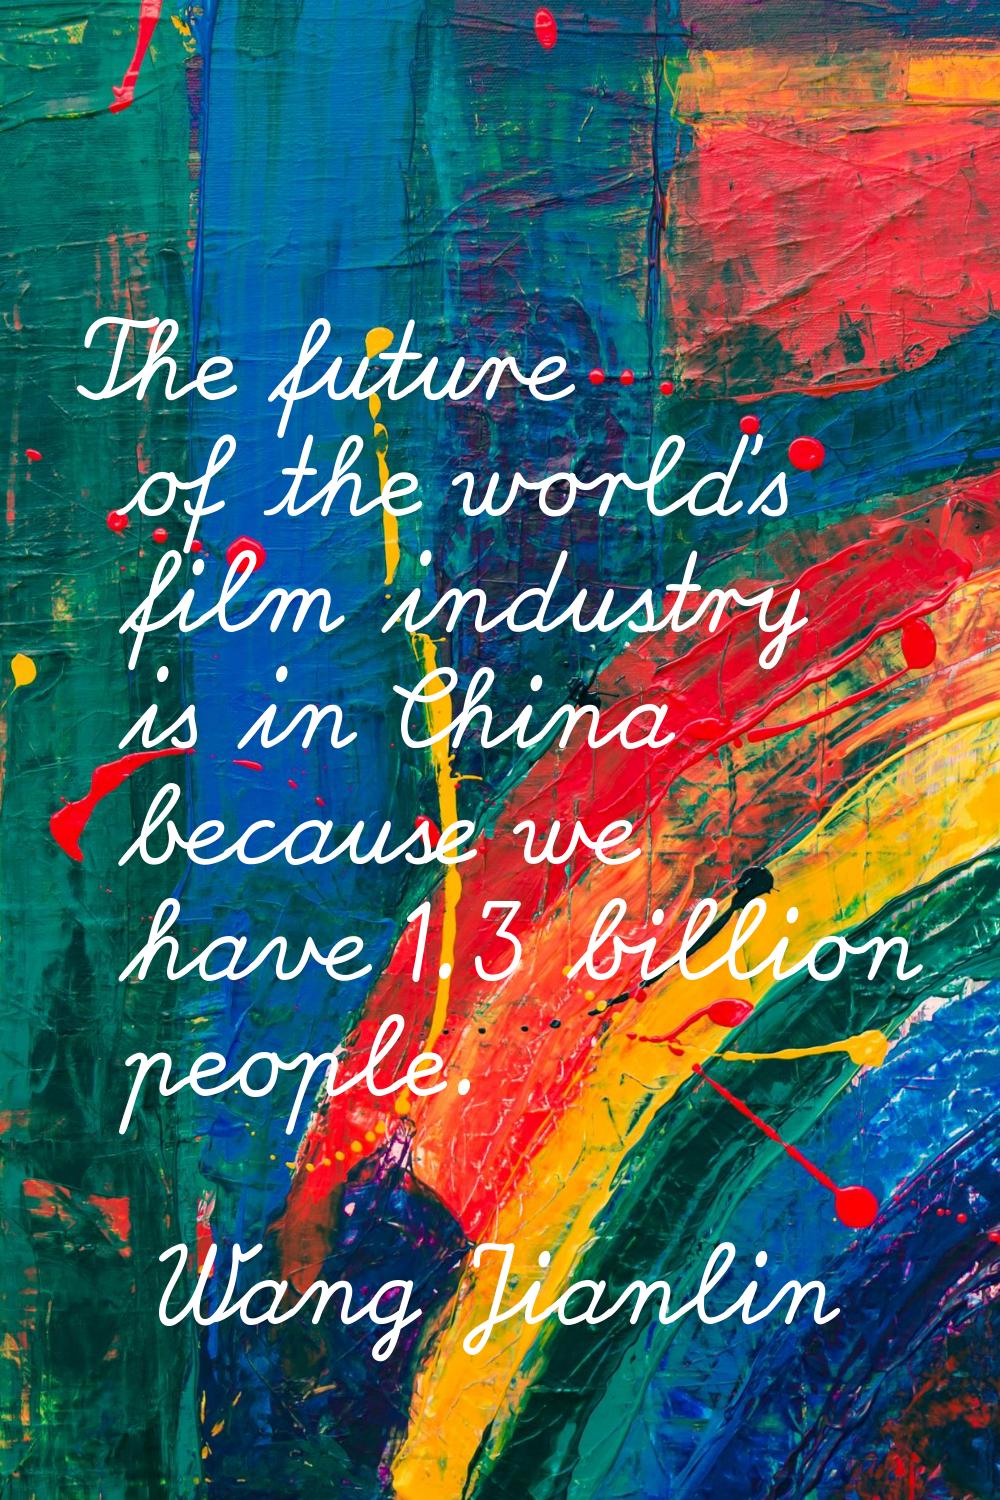 The future of the world's film industry is in China because we have 1.3 billion people.